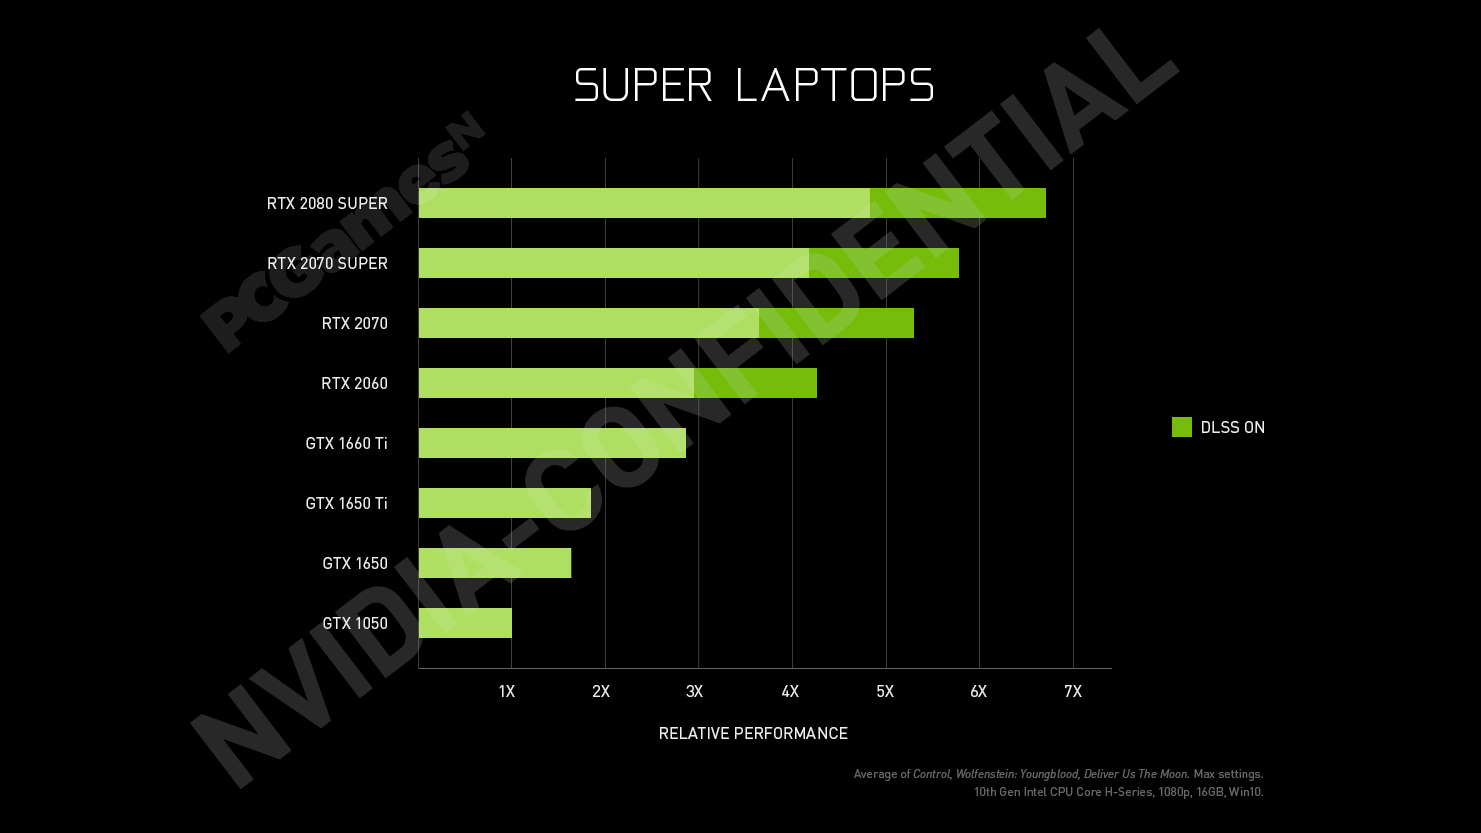 Nvidia GeForce RTX 2070 SUPER and 2080 SUPER mobile GPUs demonstrate performance in leaked SUPER LAPTOPS slide - NotebookCheck.net News